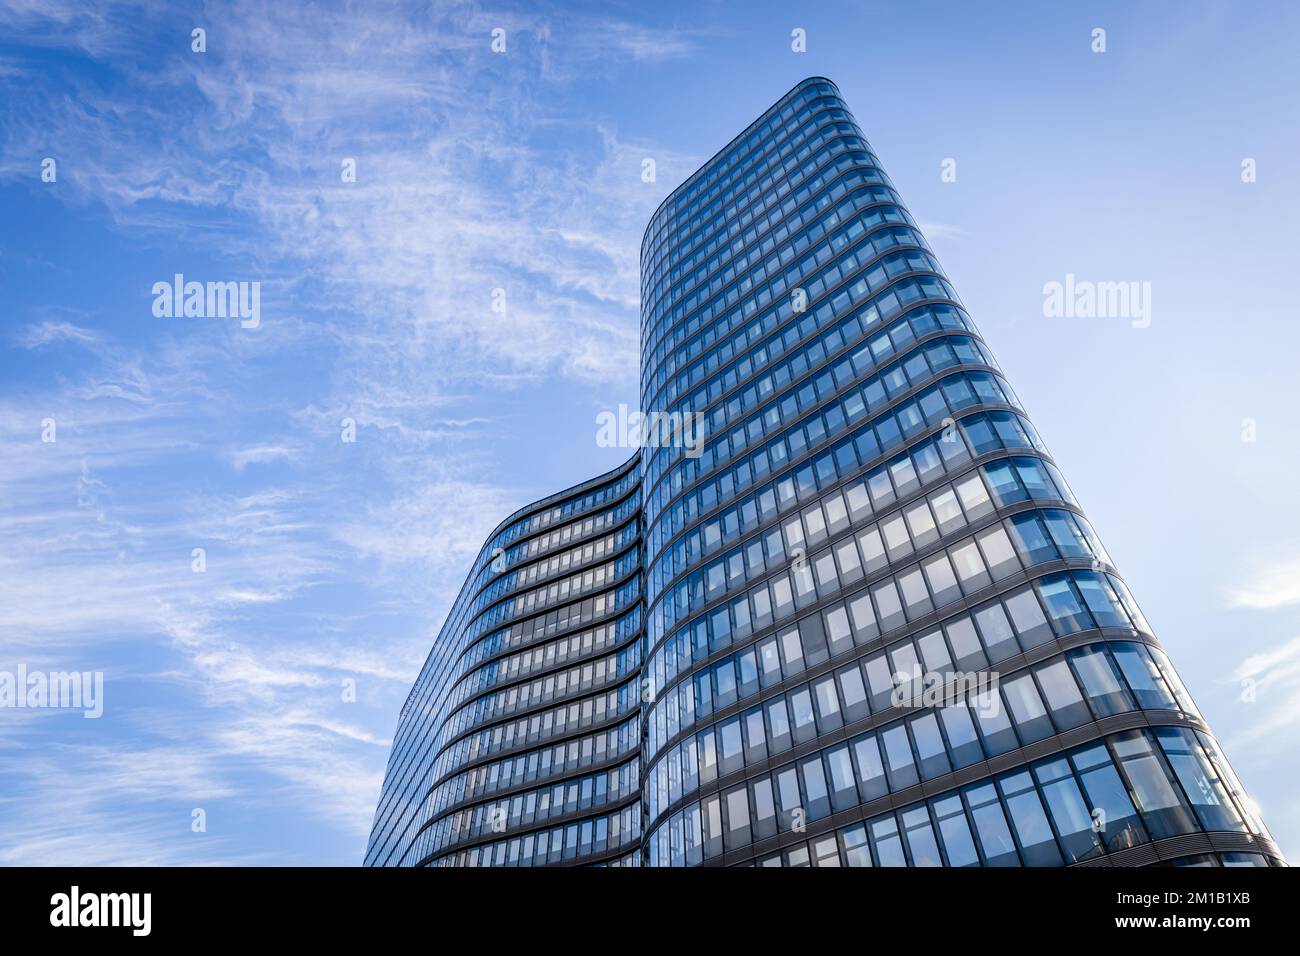 Modern buildings in Vienna. Beautiful buildings with large glass windows in Vienna, Austria. Stock Photo